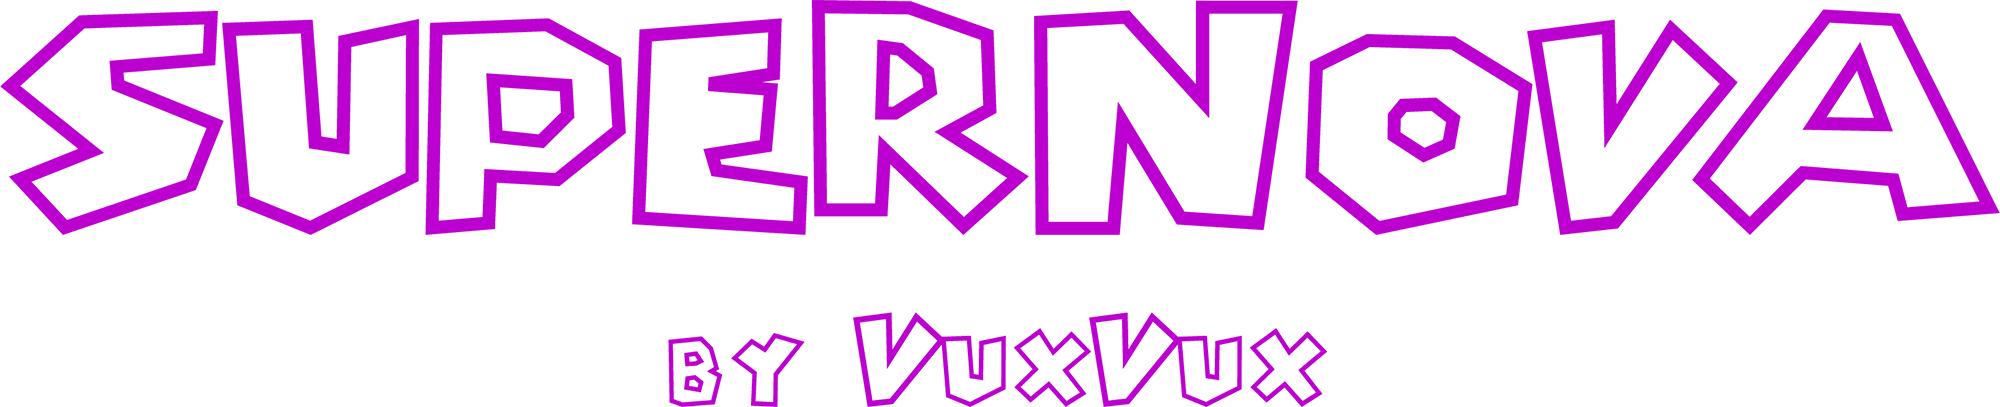 VuxVux on X: 10,000 Robux Giveaway! HOW TO ENTER: Follow